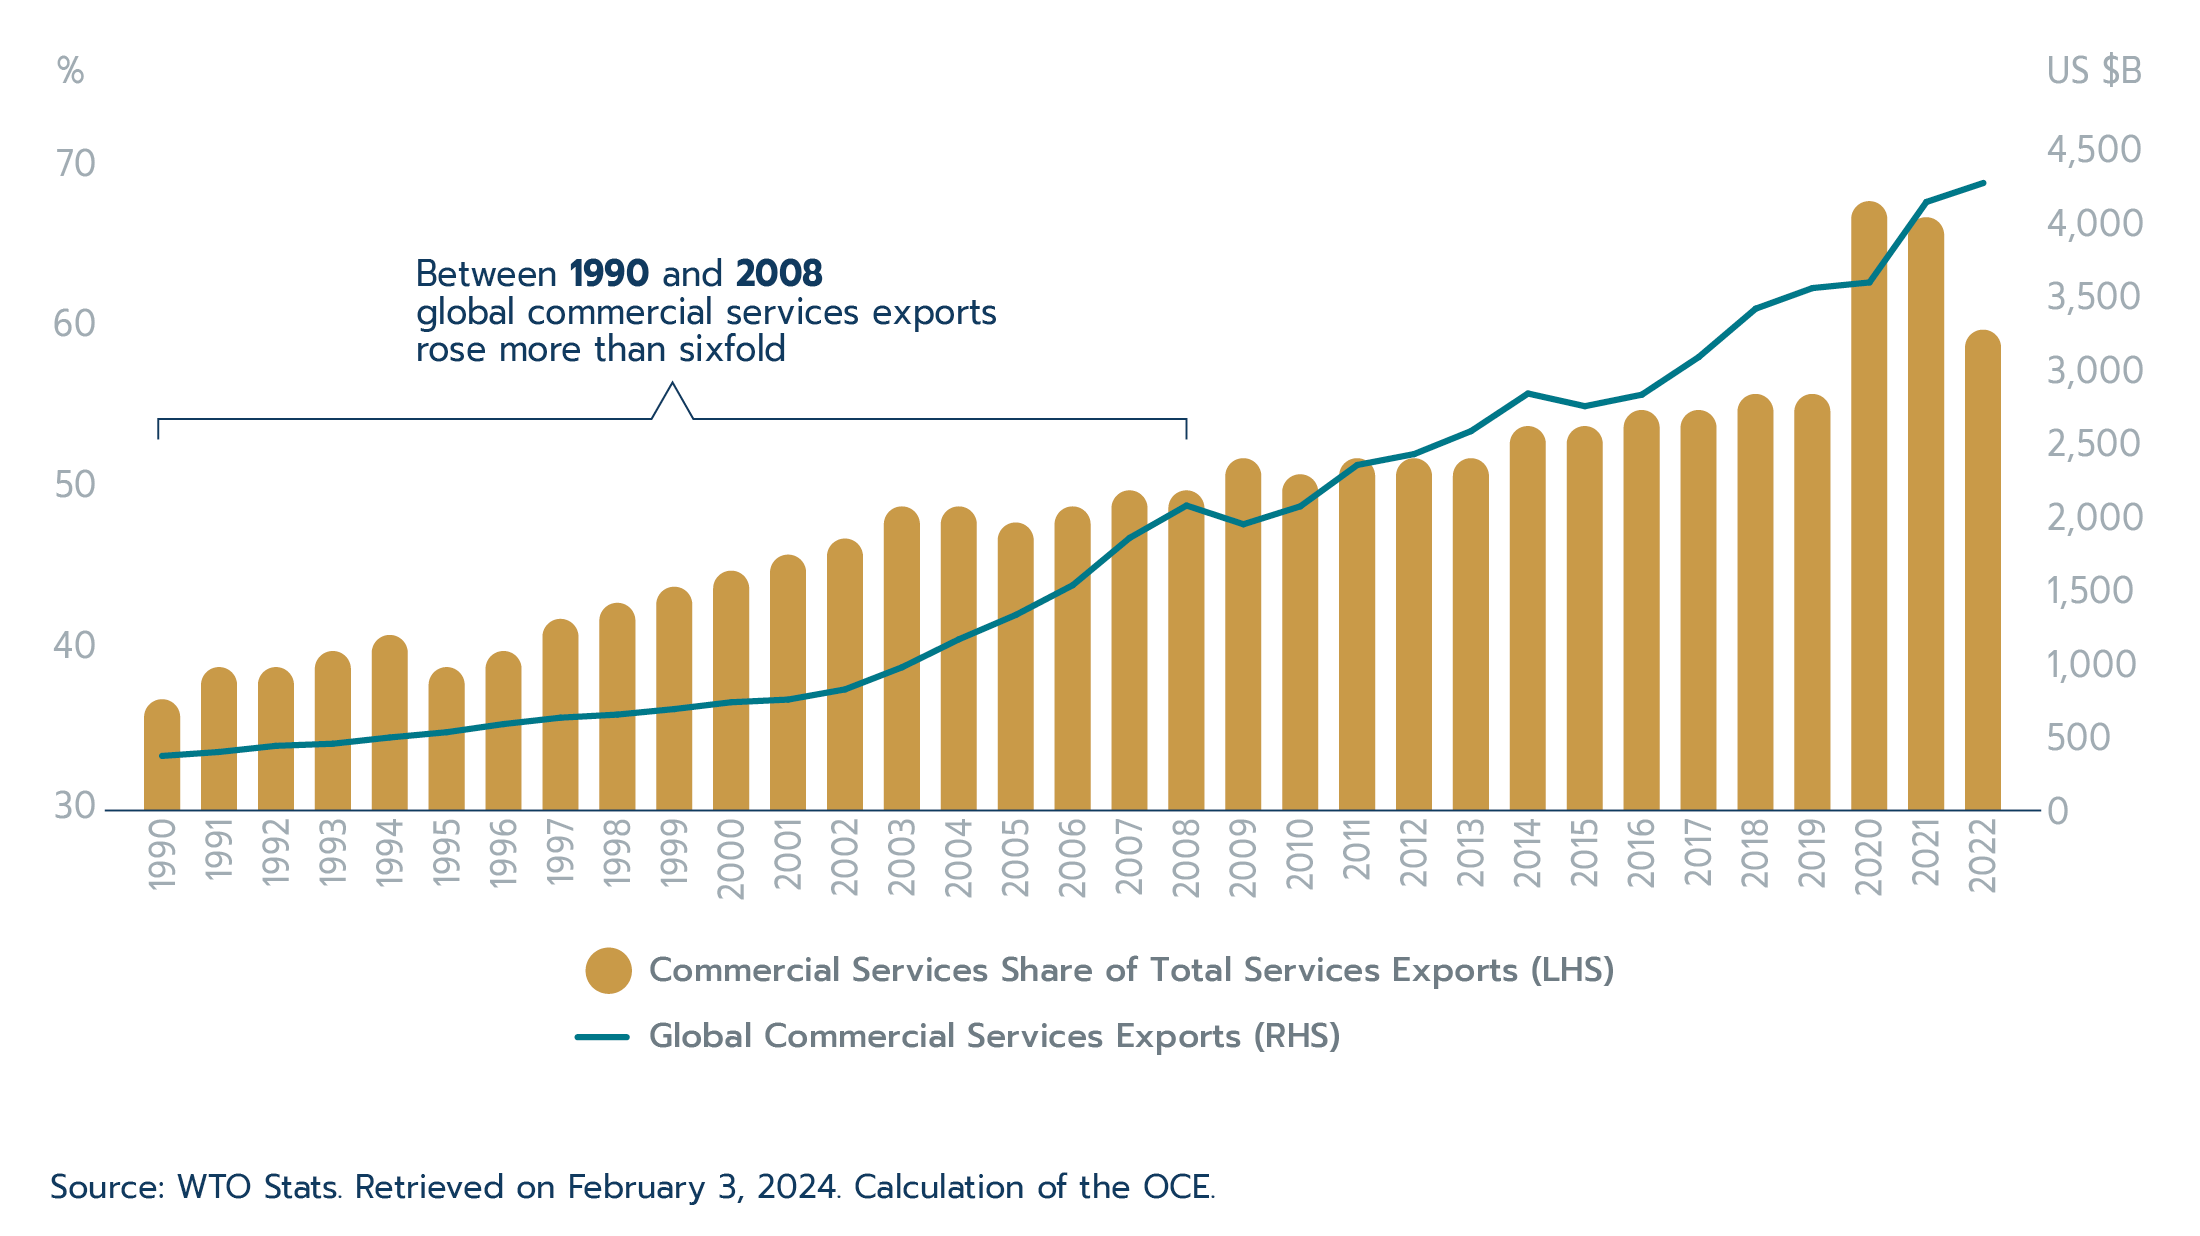 Figure 2.3: Growth in global commercial services exports